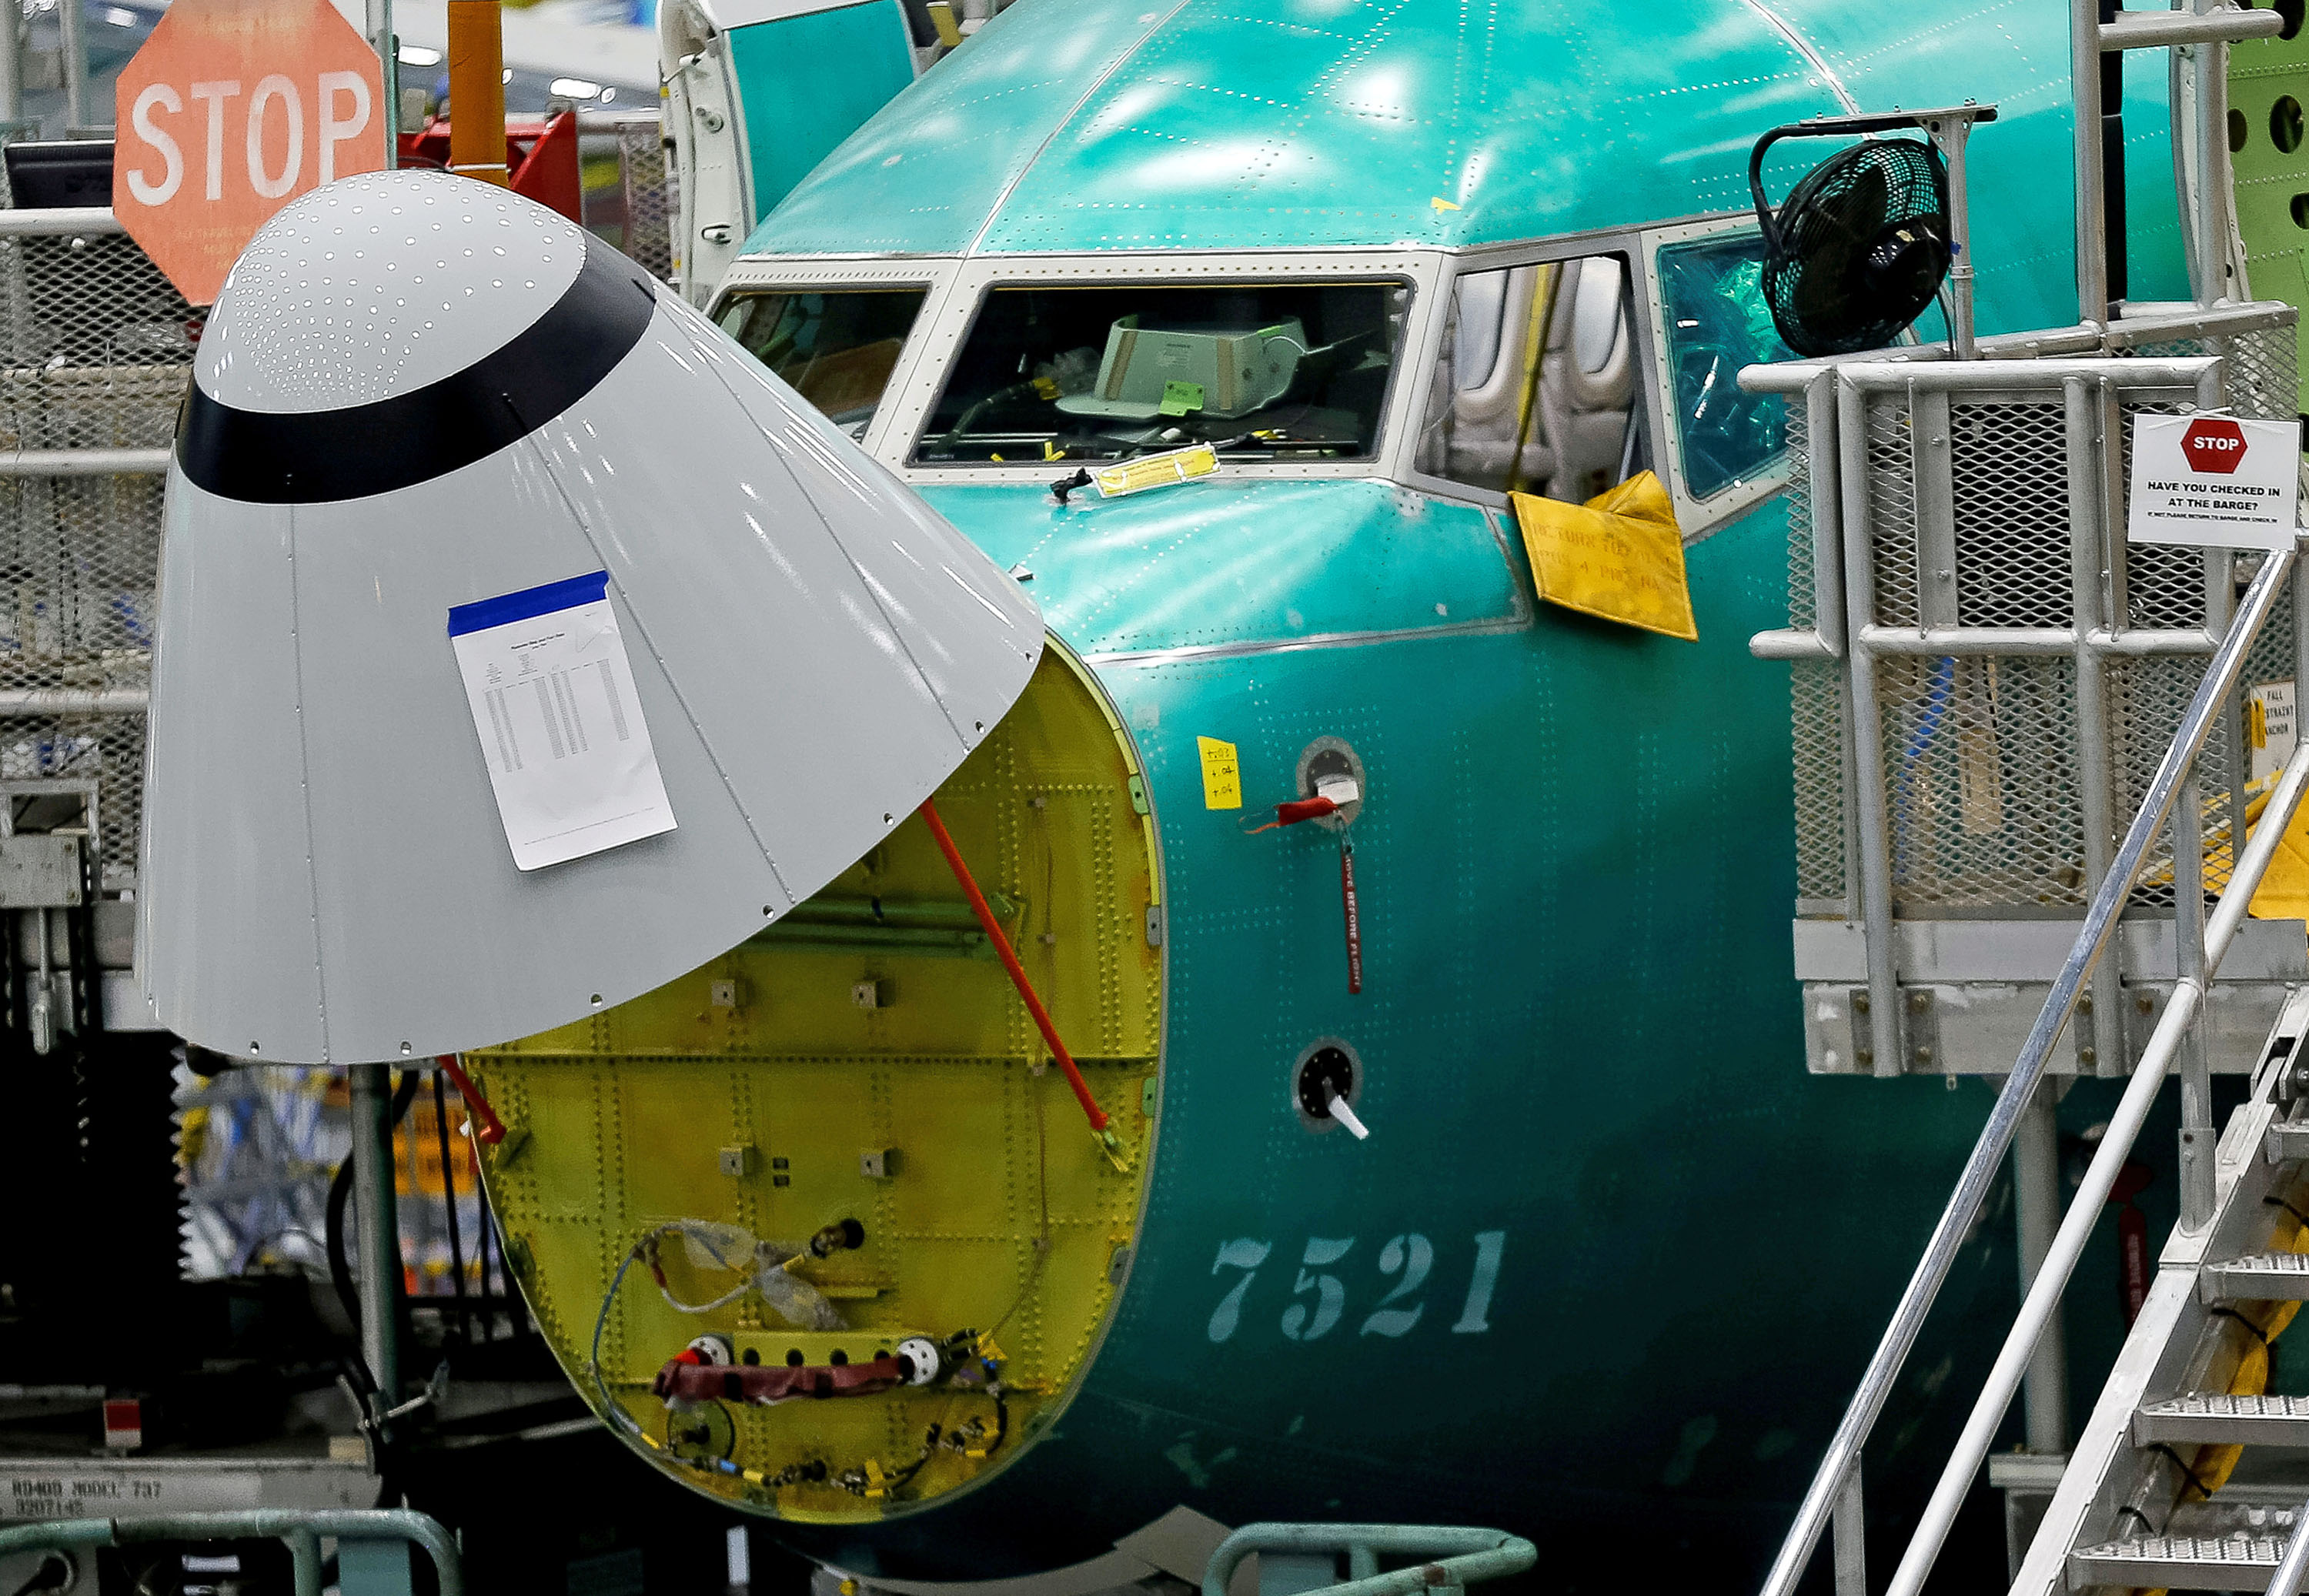 Boeing’s 737 Max shouldn’t be allowed to fly with a controversial flight-control system, an aviation regulator reportedly said in leaked emails